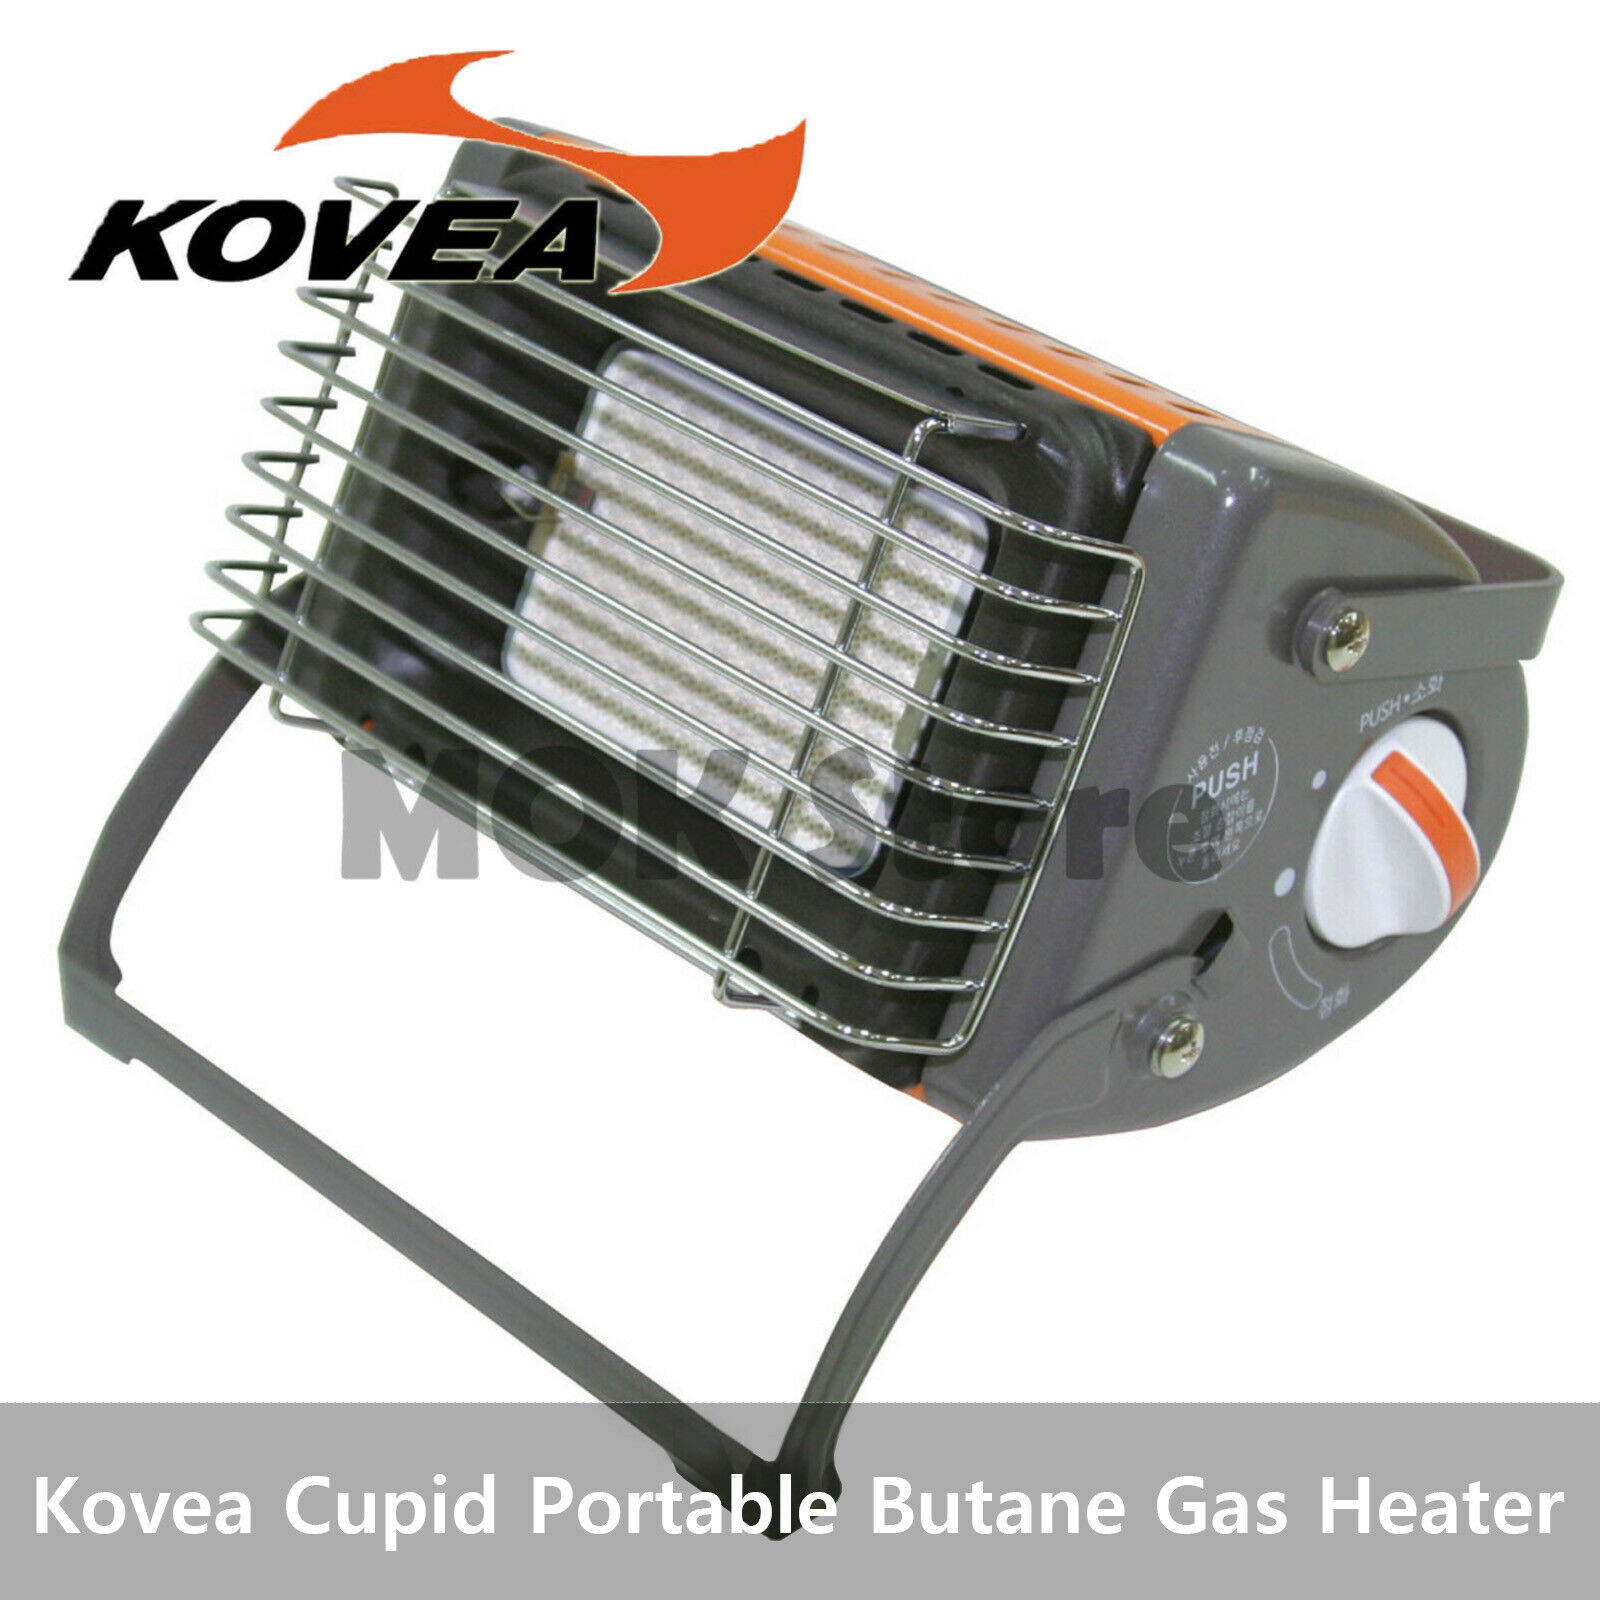 Kovea Cupid Portable Butane Gas Heater With Hardcase Outdoor Camping Kh-1203